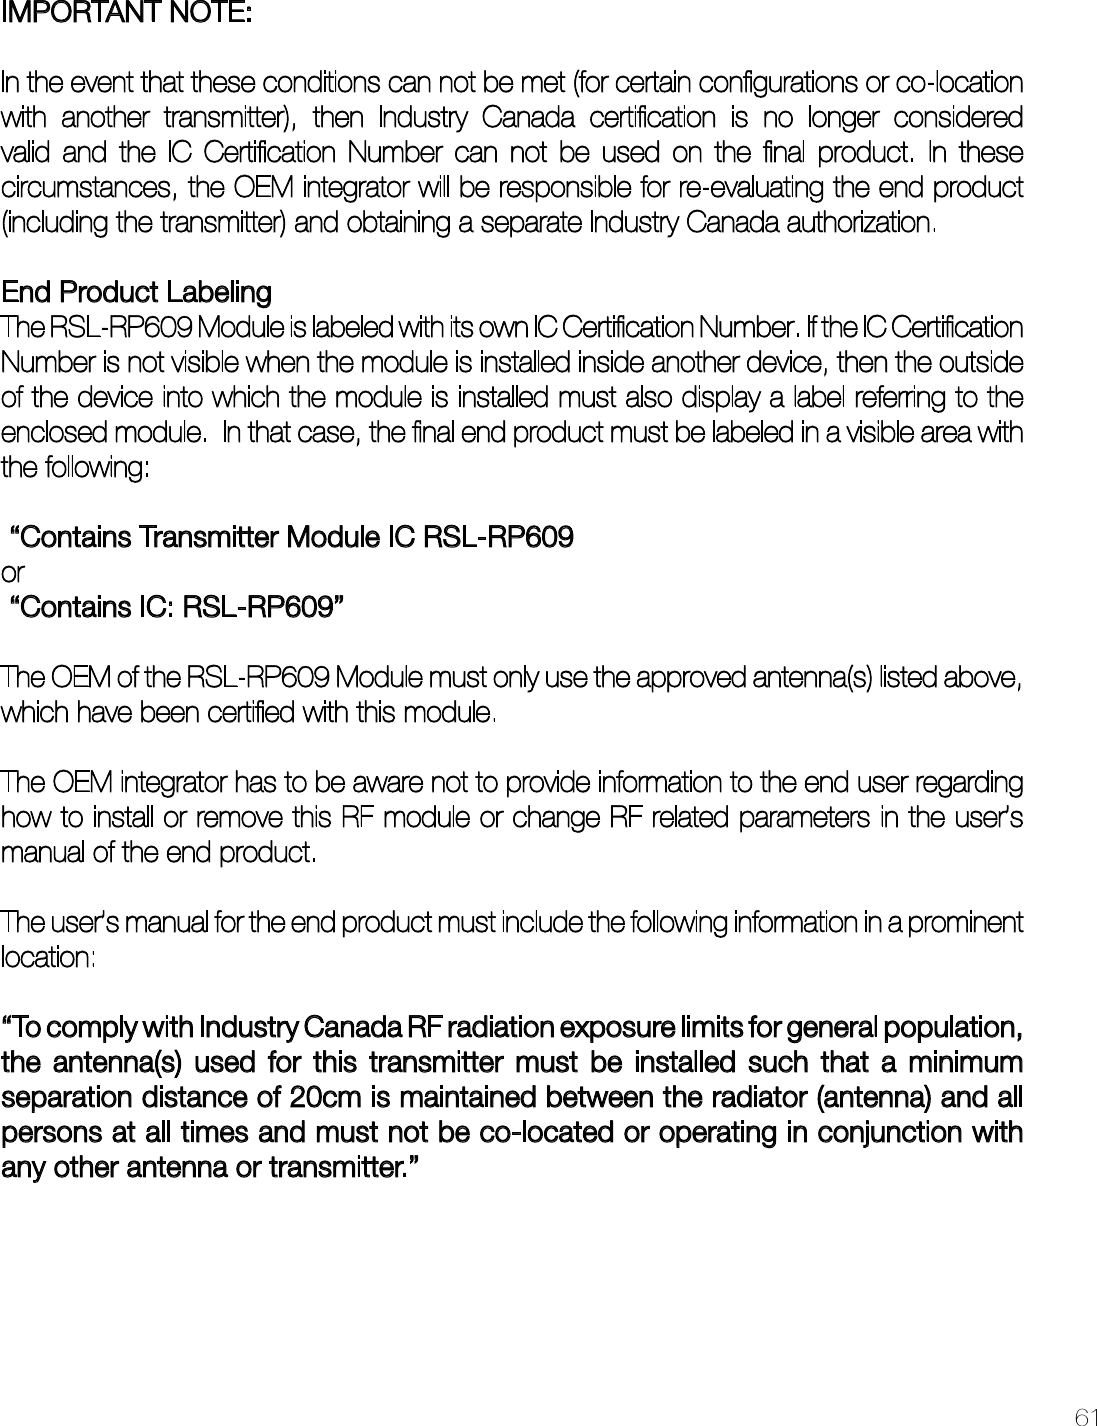 61IMPORTANT NOTE: In the event that these conditions can not be met (for certain conﬁgurations or co-location with another transmitter), then Industry Canada certiﬁcation is no longer considered valid and the IC Certiﬁcation Number can not be used on the ﬁnal product. In these circumstances, the OEM integrator will be responsible for re-evaluating the end product (including the transmitter) and obtaining a separate Industry Canada authorization.End Product LabelingThe RSL-RP609 Module is labeled with its own IC Certiﬁcation Number. If the IC Certiﬁcation Number is not visible when the module is installed inside another device, then the outside of the device into which the module is installed must also display a label referring to the enclosed module.  In that case, the ﬁnal end product must be labeled in a visible area with the following:  “Contains Transmitter Module IC RSL-RP609or  “Contains IC: RSL-RP609” The OEM of the RSL-RP609 Module must only use the approved antenna(s) listed above, which have been certiﬁed with this module.The OEM integrator has to be aware not to provide information to the end user regarding how to install or remove this RF module or change RF related parameters in the user’s manual of the end product.The user’s manual for the end product must include the following information in a prominent location:“To comply with Industry Canada RF radiation exposure limits for general population, the antenna(s) used for this transmitter must be installed such that a minimum separation distance of 20cm is maintained between the radiator (antenna) and all persons at all times and must not be co-located or operating in conjunction with any other antenna or transmitter.”